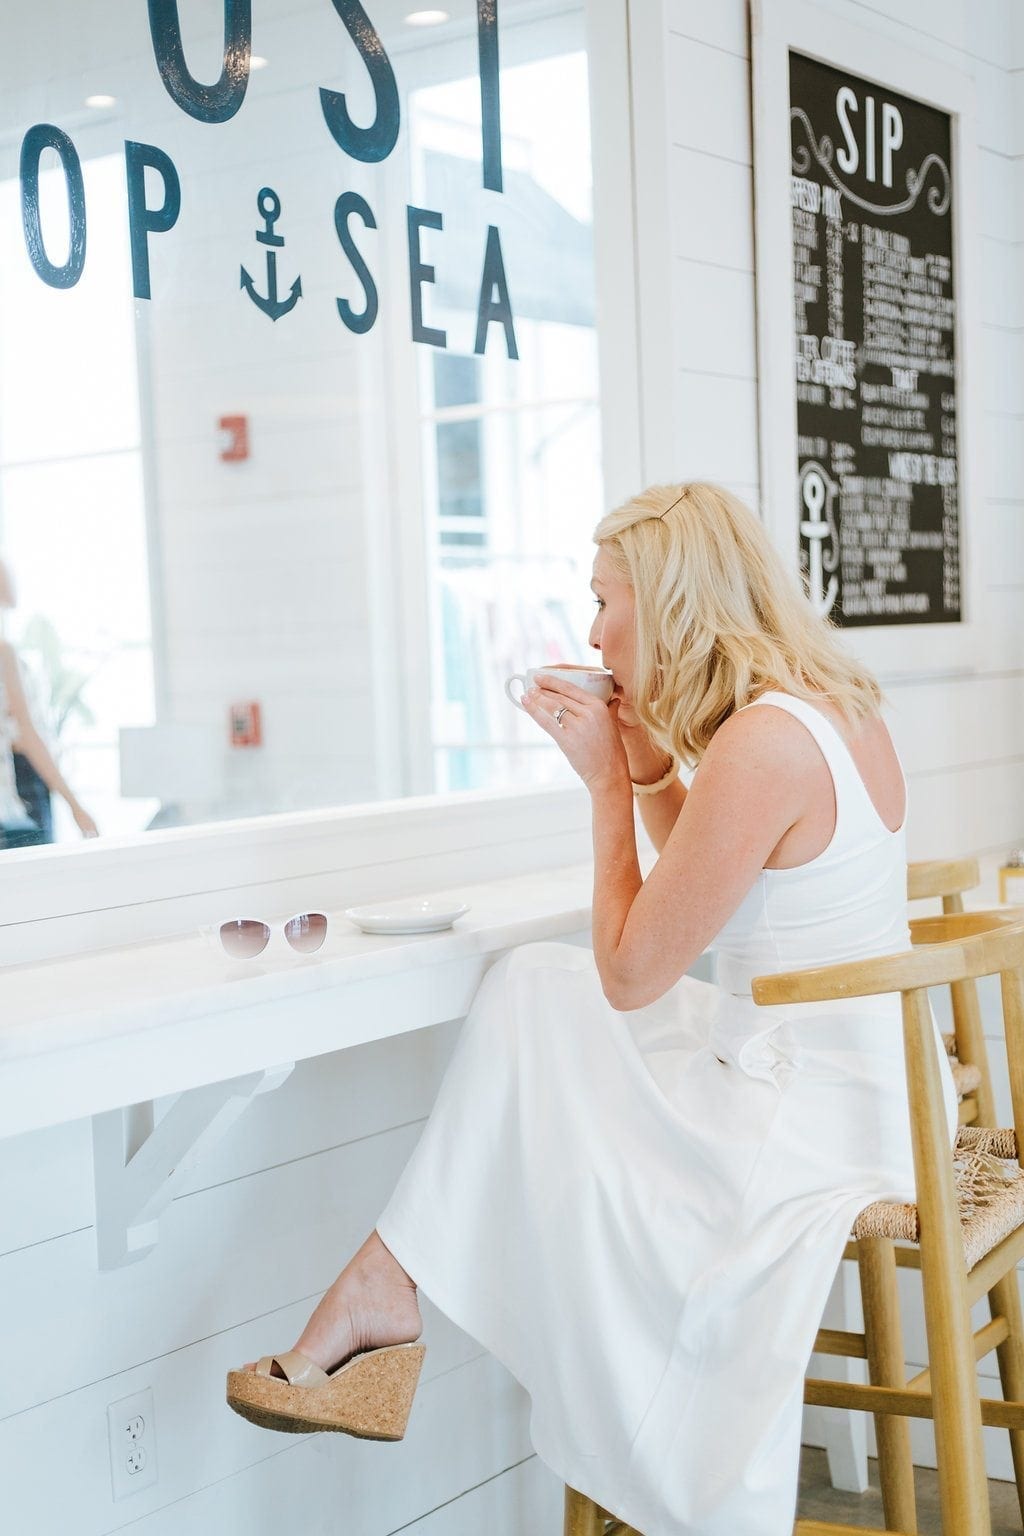 Rosemary Beach vacations. White dress in coffee shop. The Outpost in Rosemary Beach.